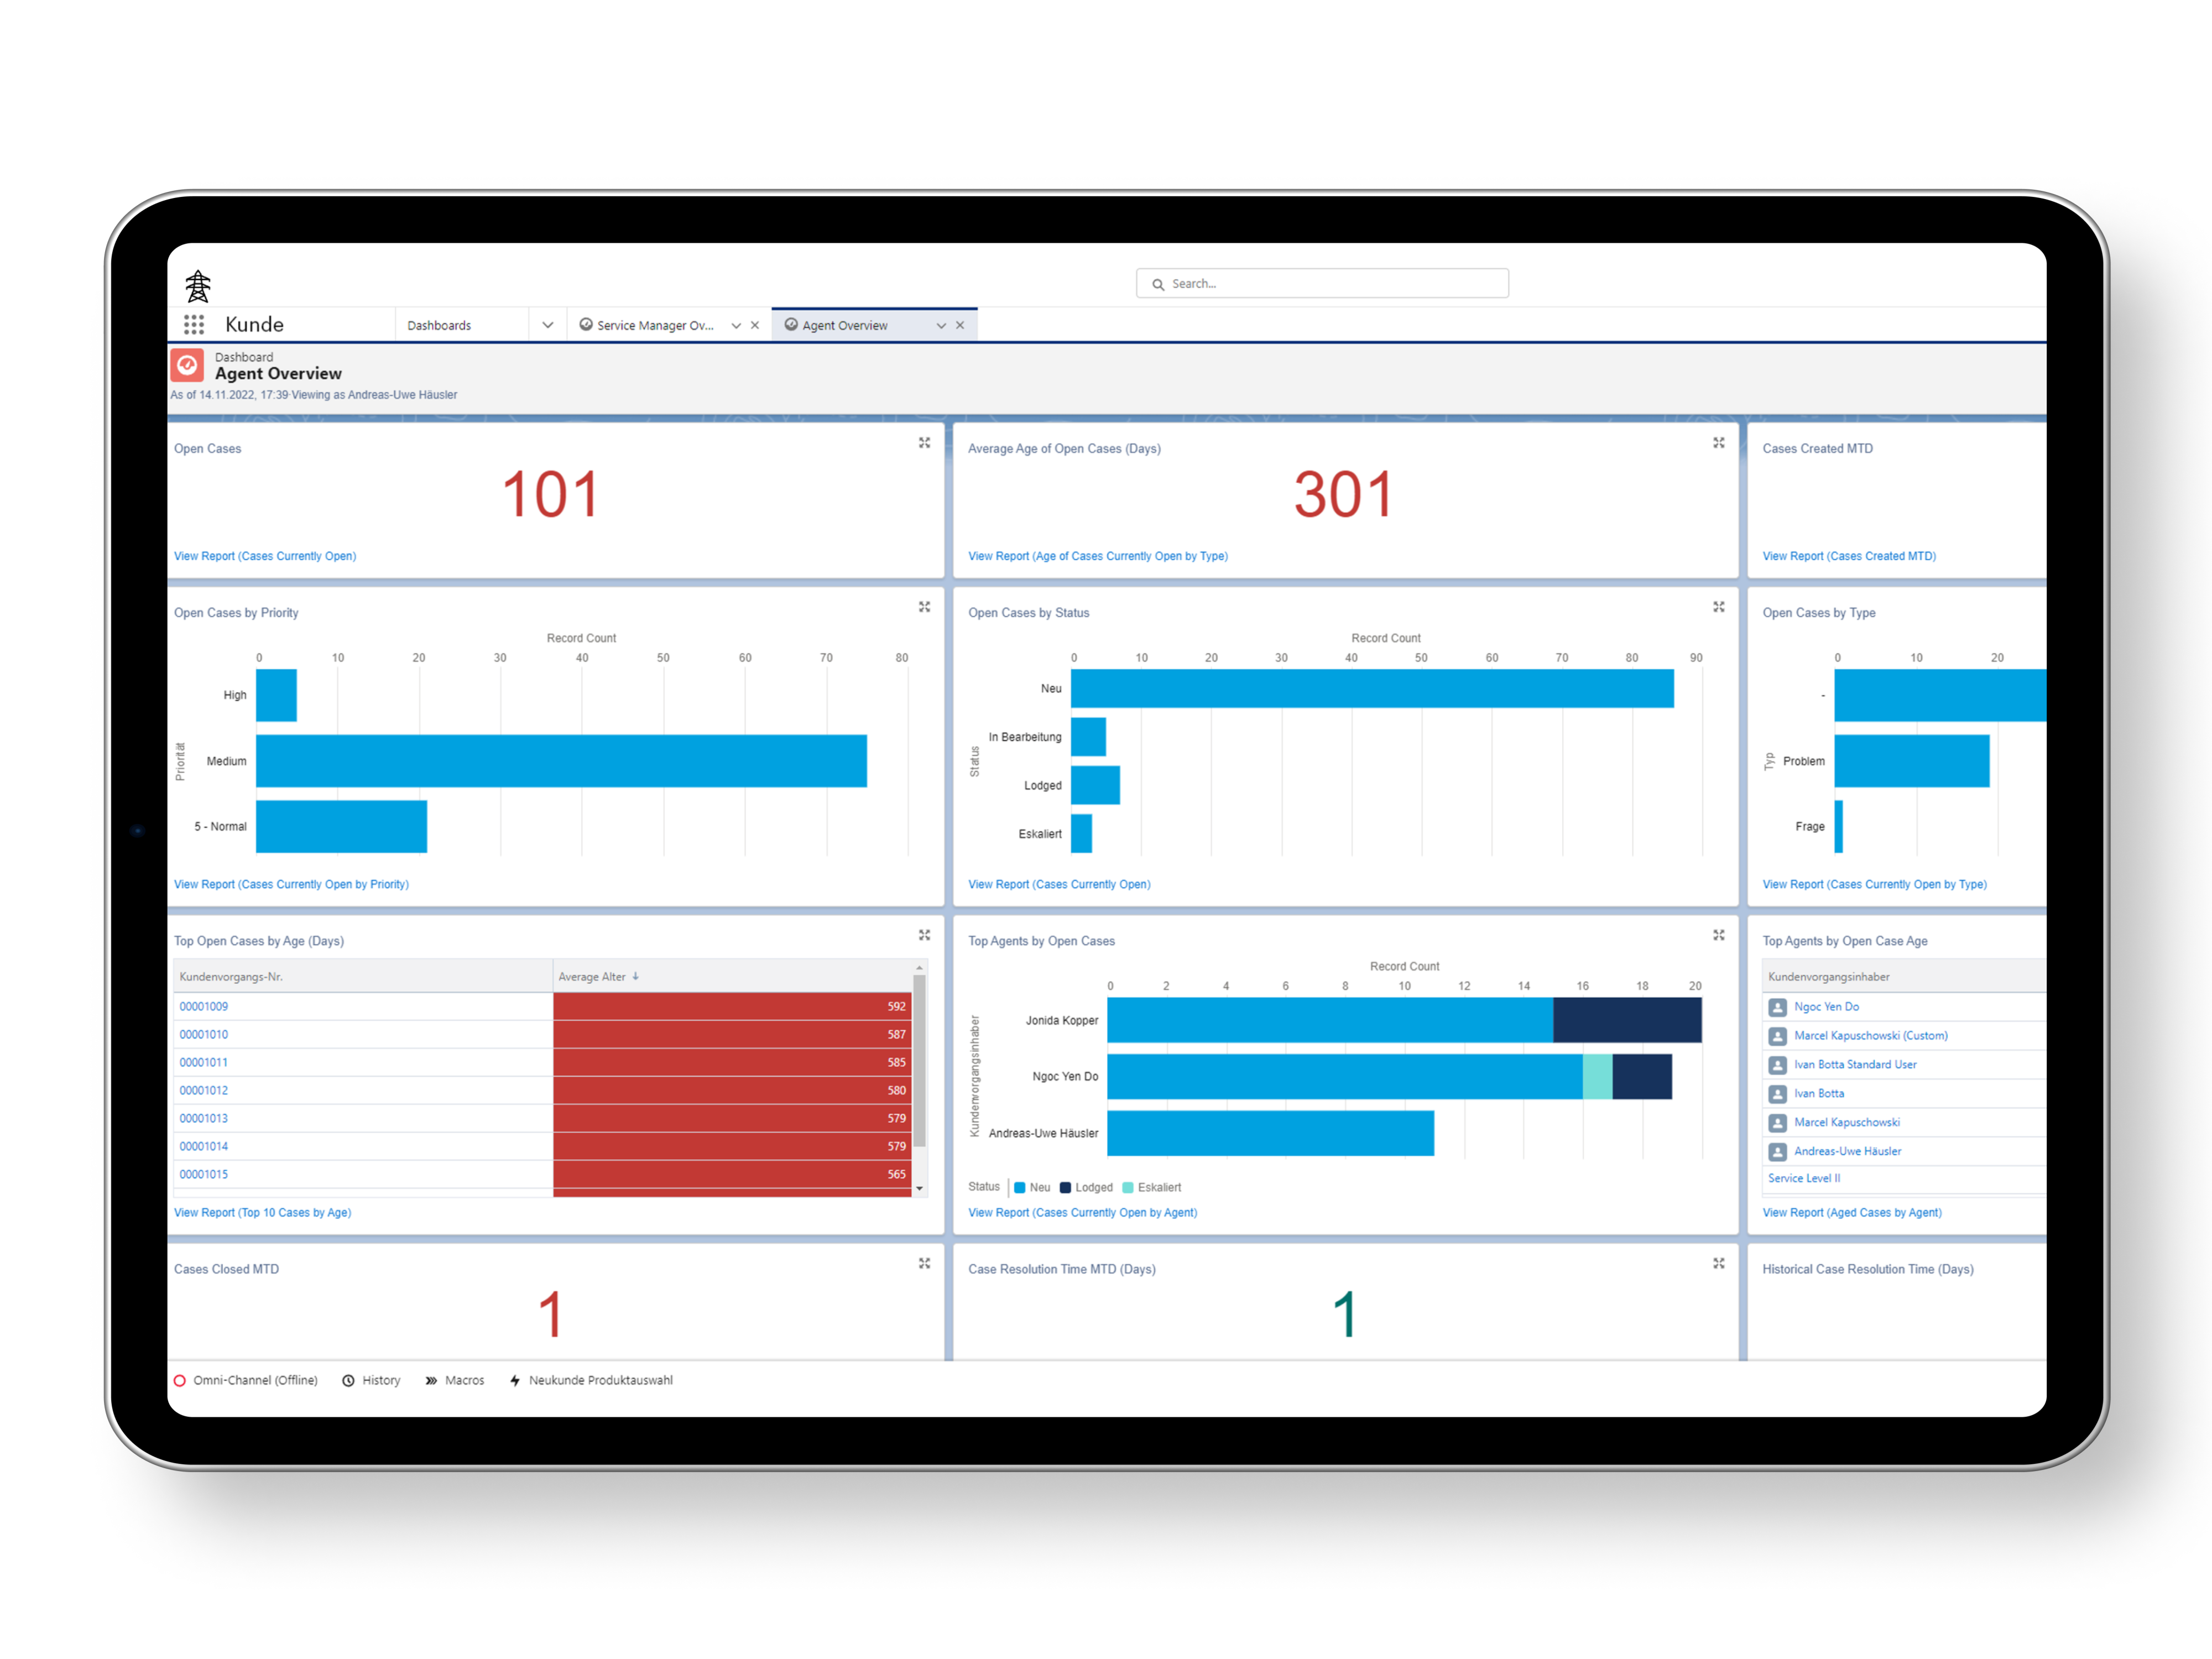 The screenshot shows a Salesforce dashboard with visualizations of different KPIs in the customer service area. Examples are number of open cases, grouping of open cases by priority & status, TOP cases, TOP agents.